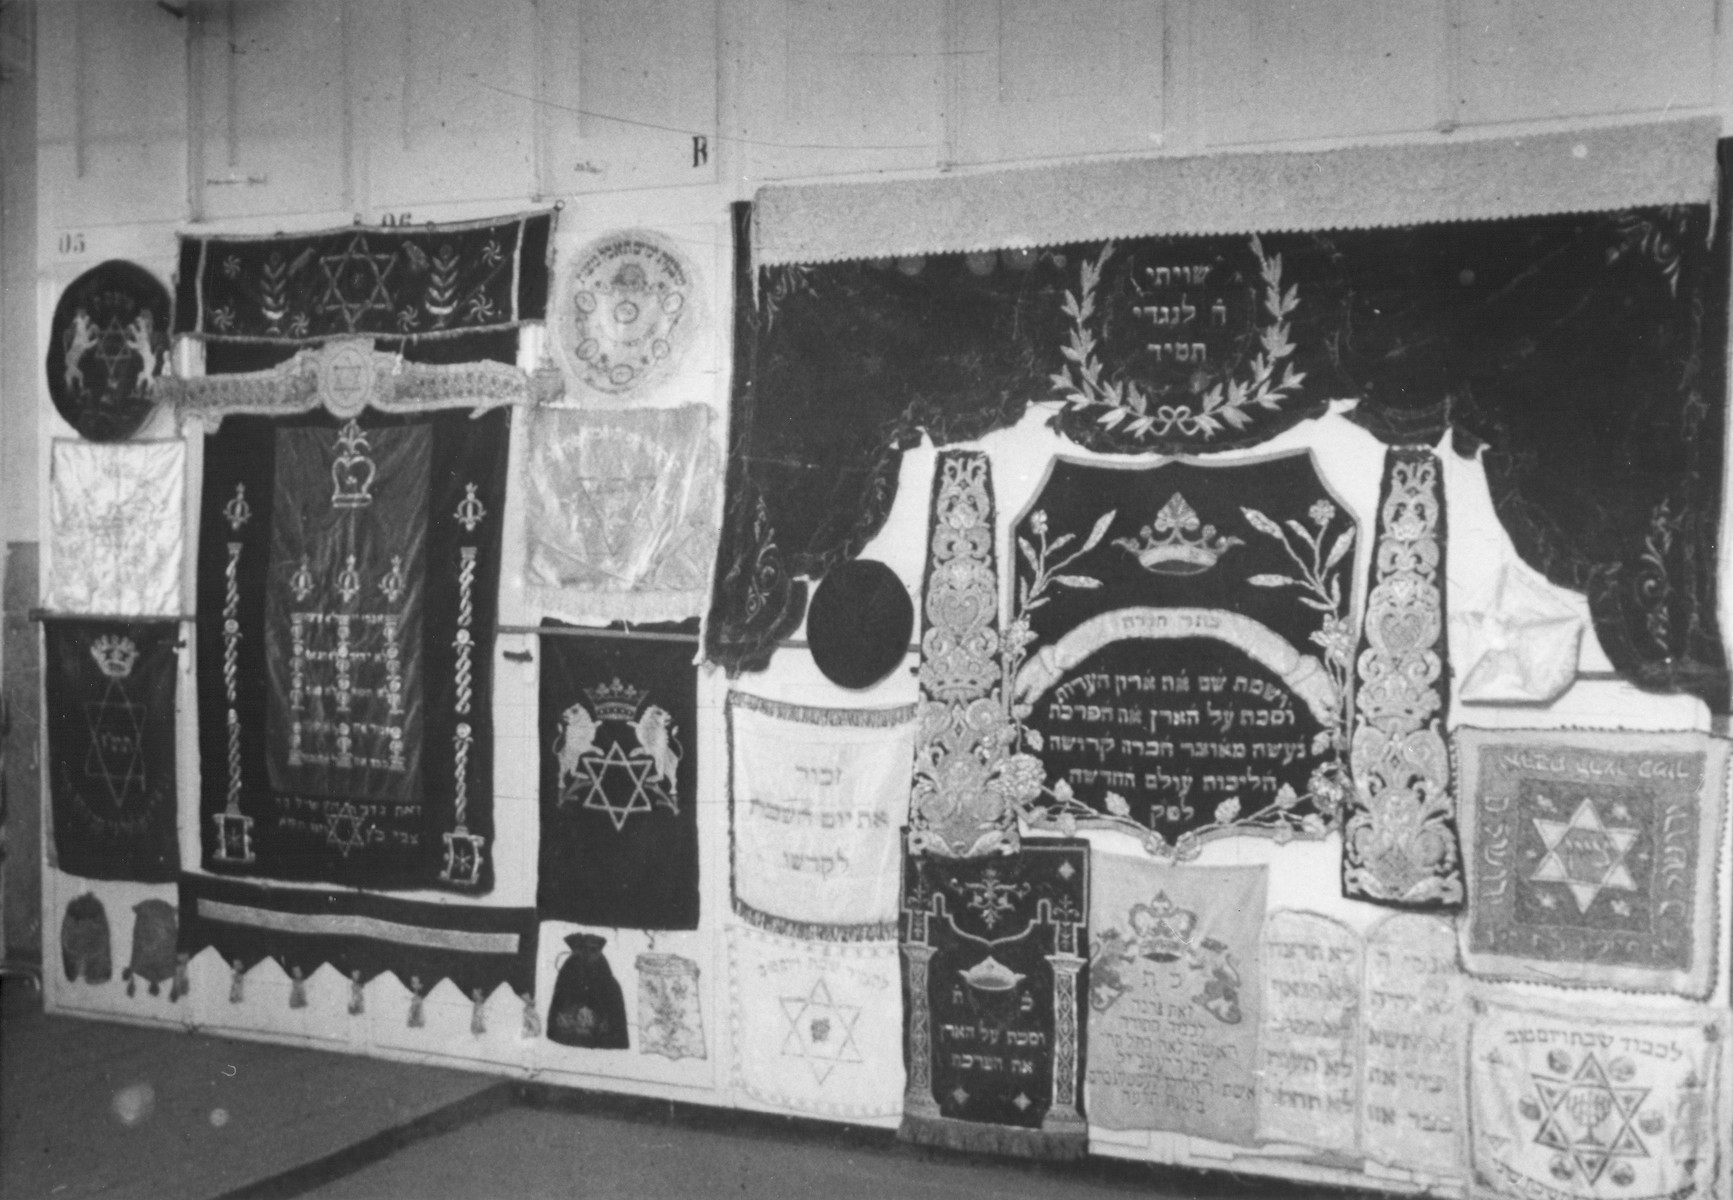 Display of ritual synagogue textiles confiscated by the Nazis.

The Torah curtain, bottom row, third from the right, is now part of the collection of the Jewish Museum of Westphali. They acquired the curtain from art trade "Pieces of Time," London in 1987 and provided the caption and following translation:

"The historically valuable Torah curtain dates from 1925 and it is white for the high religious occasions. The donors were Leah Kestenbaum (1864-1949) and her husband Reb Elijahu Kestenbaum (1862-1936) from Leipzig. The family emigrated in the 1930s to New York, where their Descendants still live today. The curtain has the following embroidery:

This is a gift in honor of the torah Mrs. Leah Rachel, may she live/long she shall live, Daughter of Reb Jakob, blessed memory (s..l: sichrono li-wrachah
The wife of Reb  Elijah (u) Kestenboim/Kestenbaum
In the year 1925"